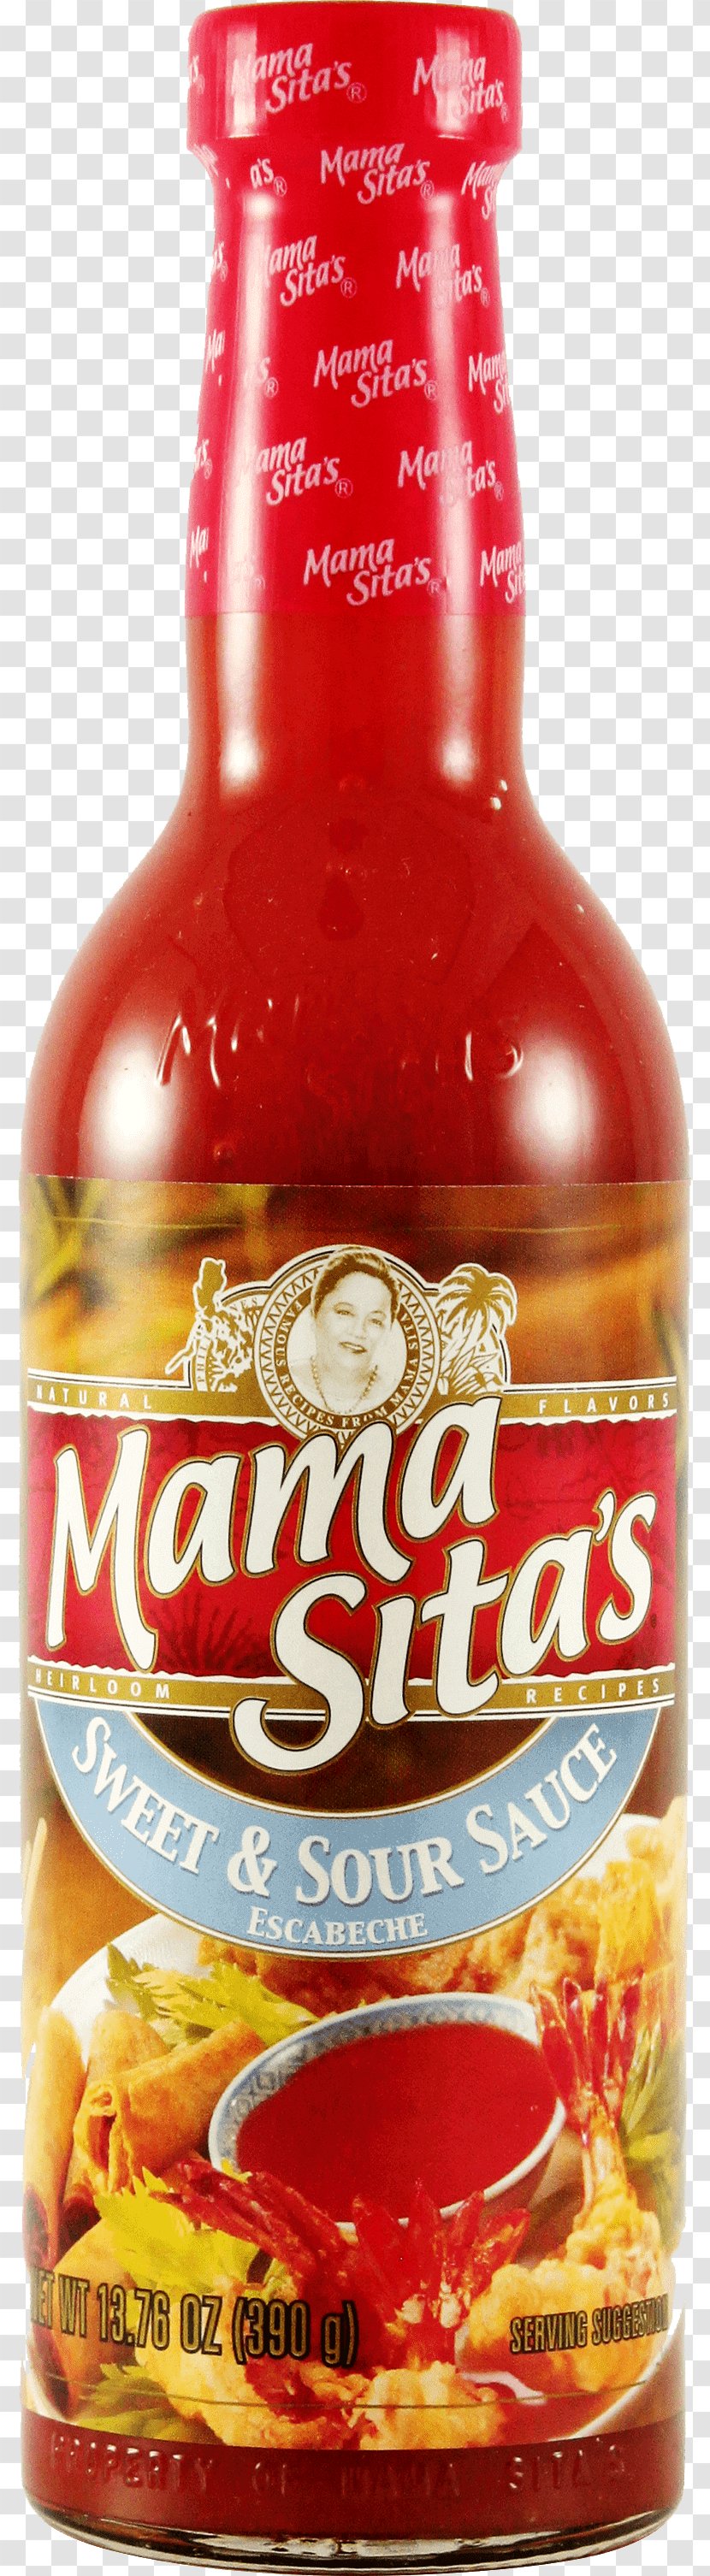 Sweet And Sour Sauces Chili Sauce Asian Cuisine Mama Sita's Holding Company - Simple Pan Fried Fish Transparent PNG